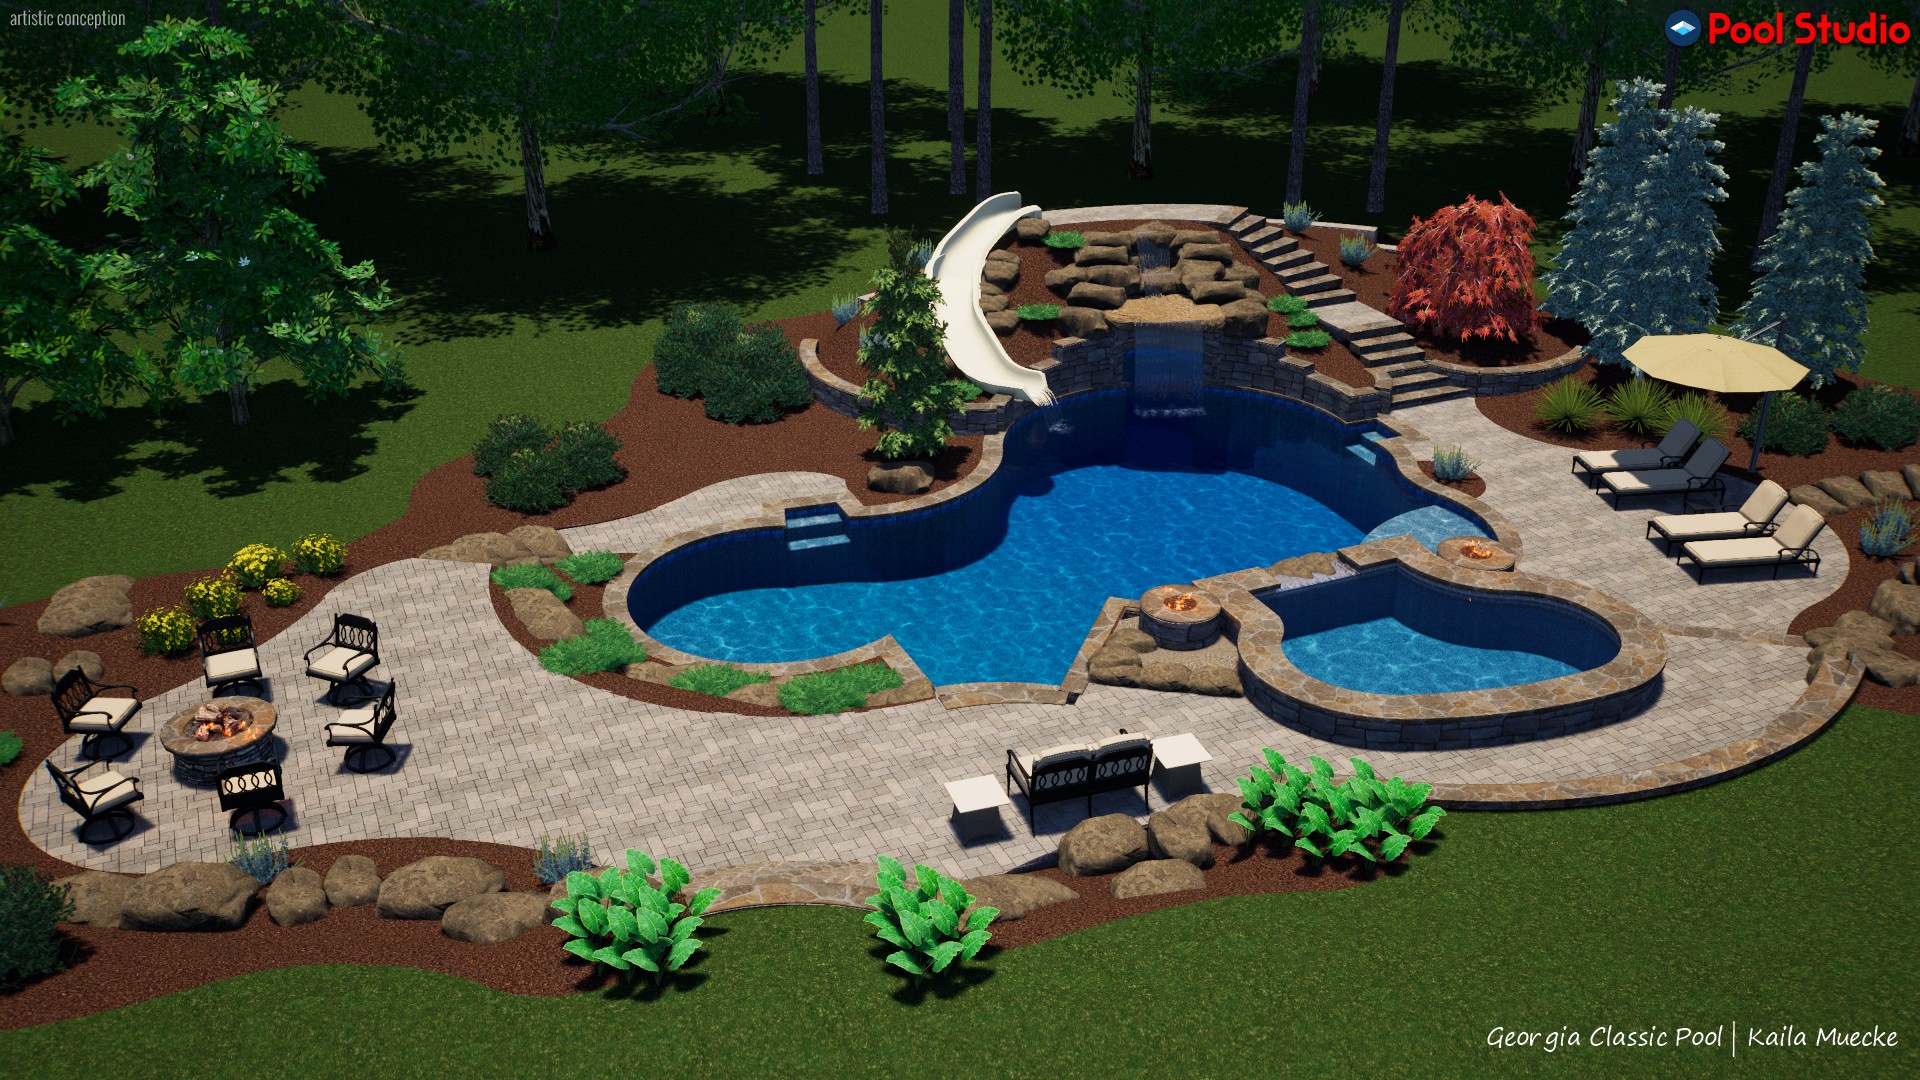 A 3D rendering of a modern pool with a boulder waterfall and slide.